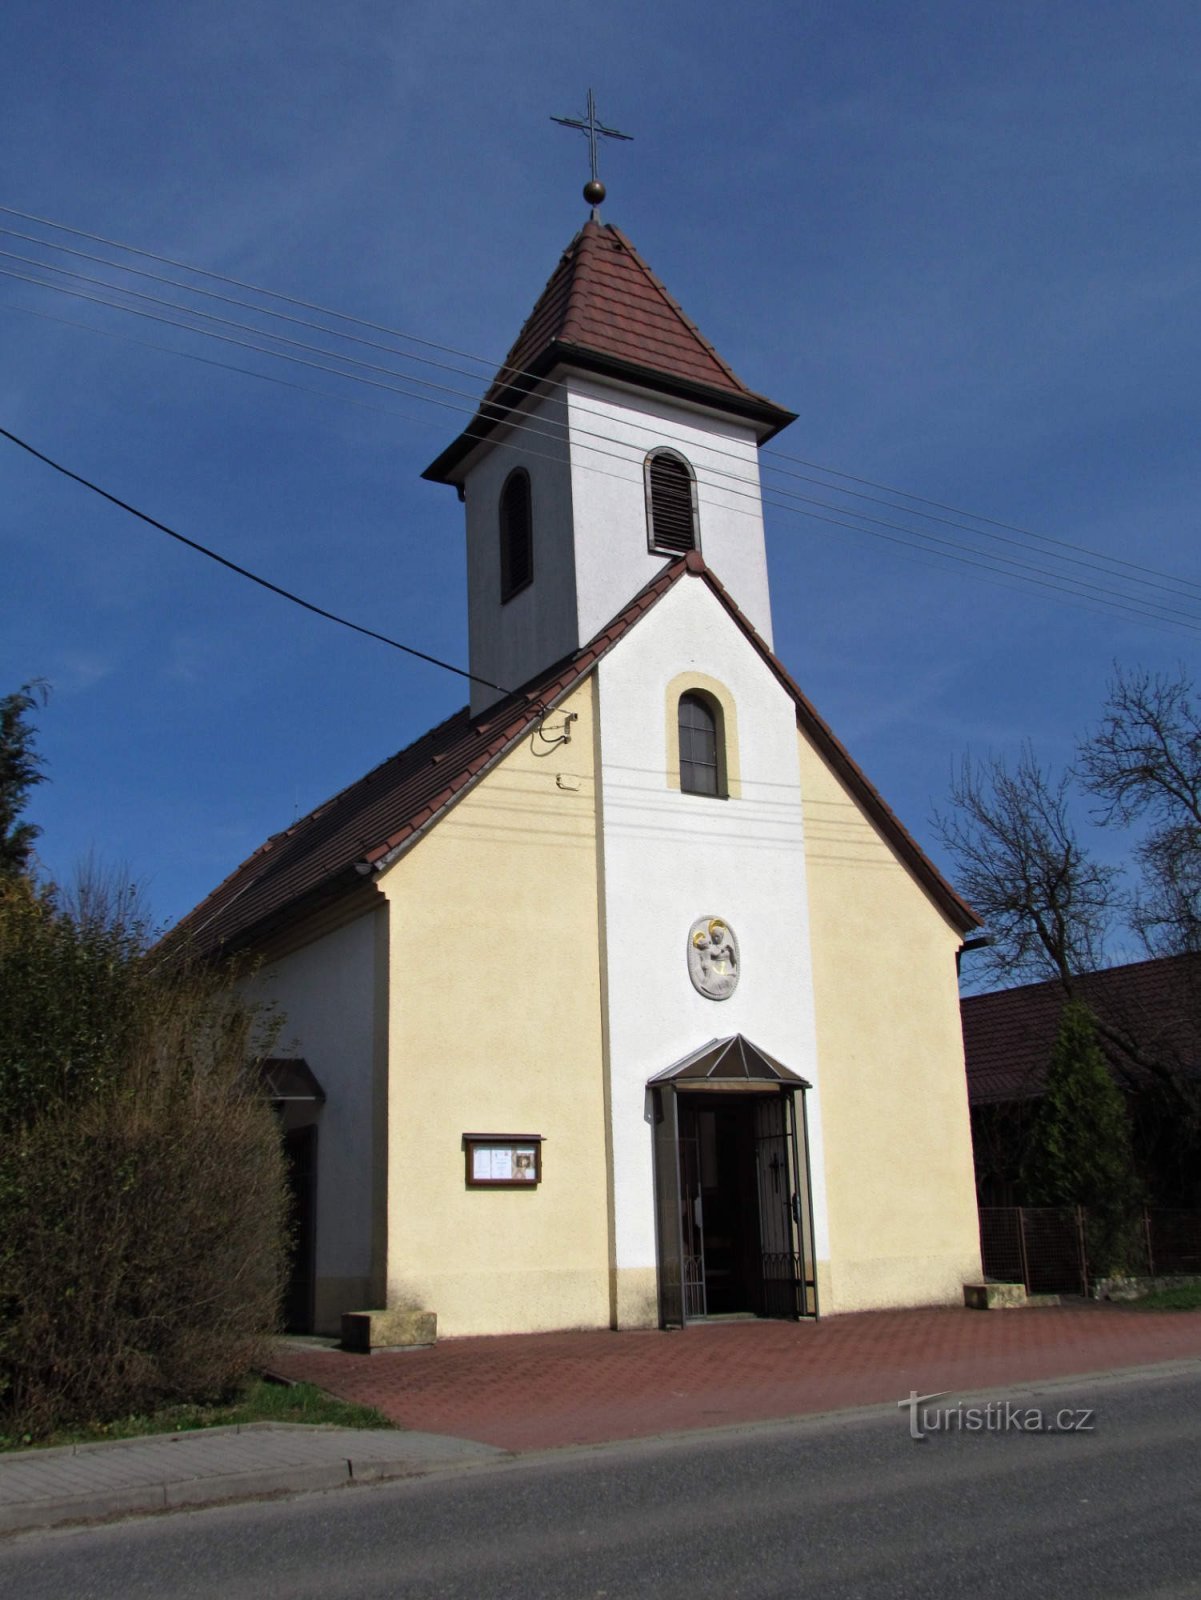 Salaš - chapel of Our Lady of the Rosary